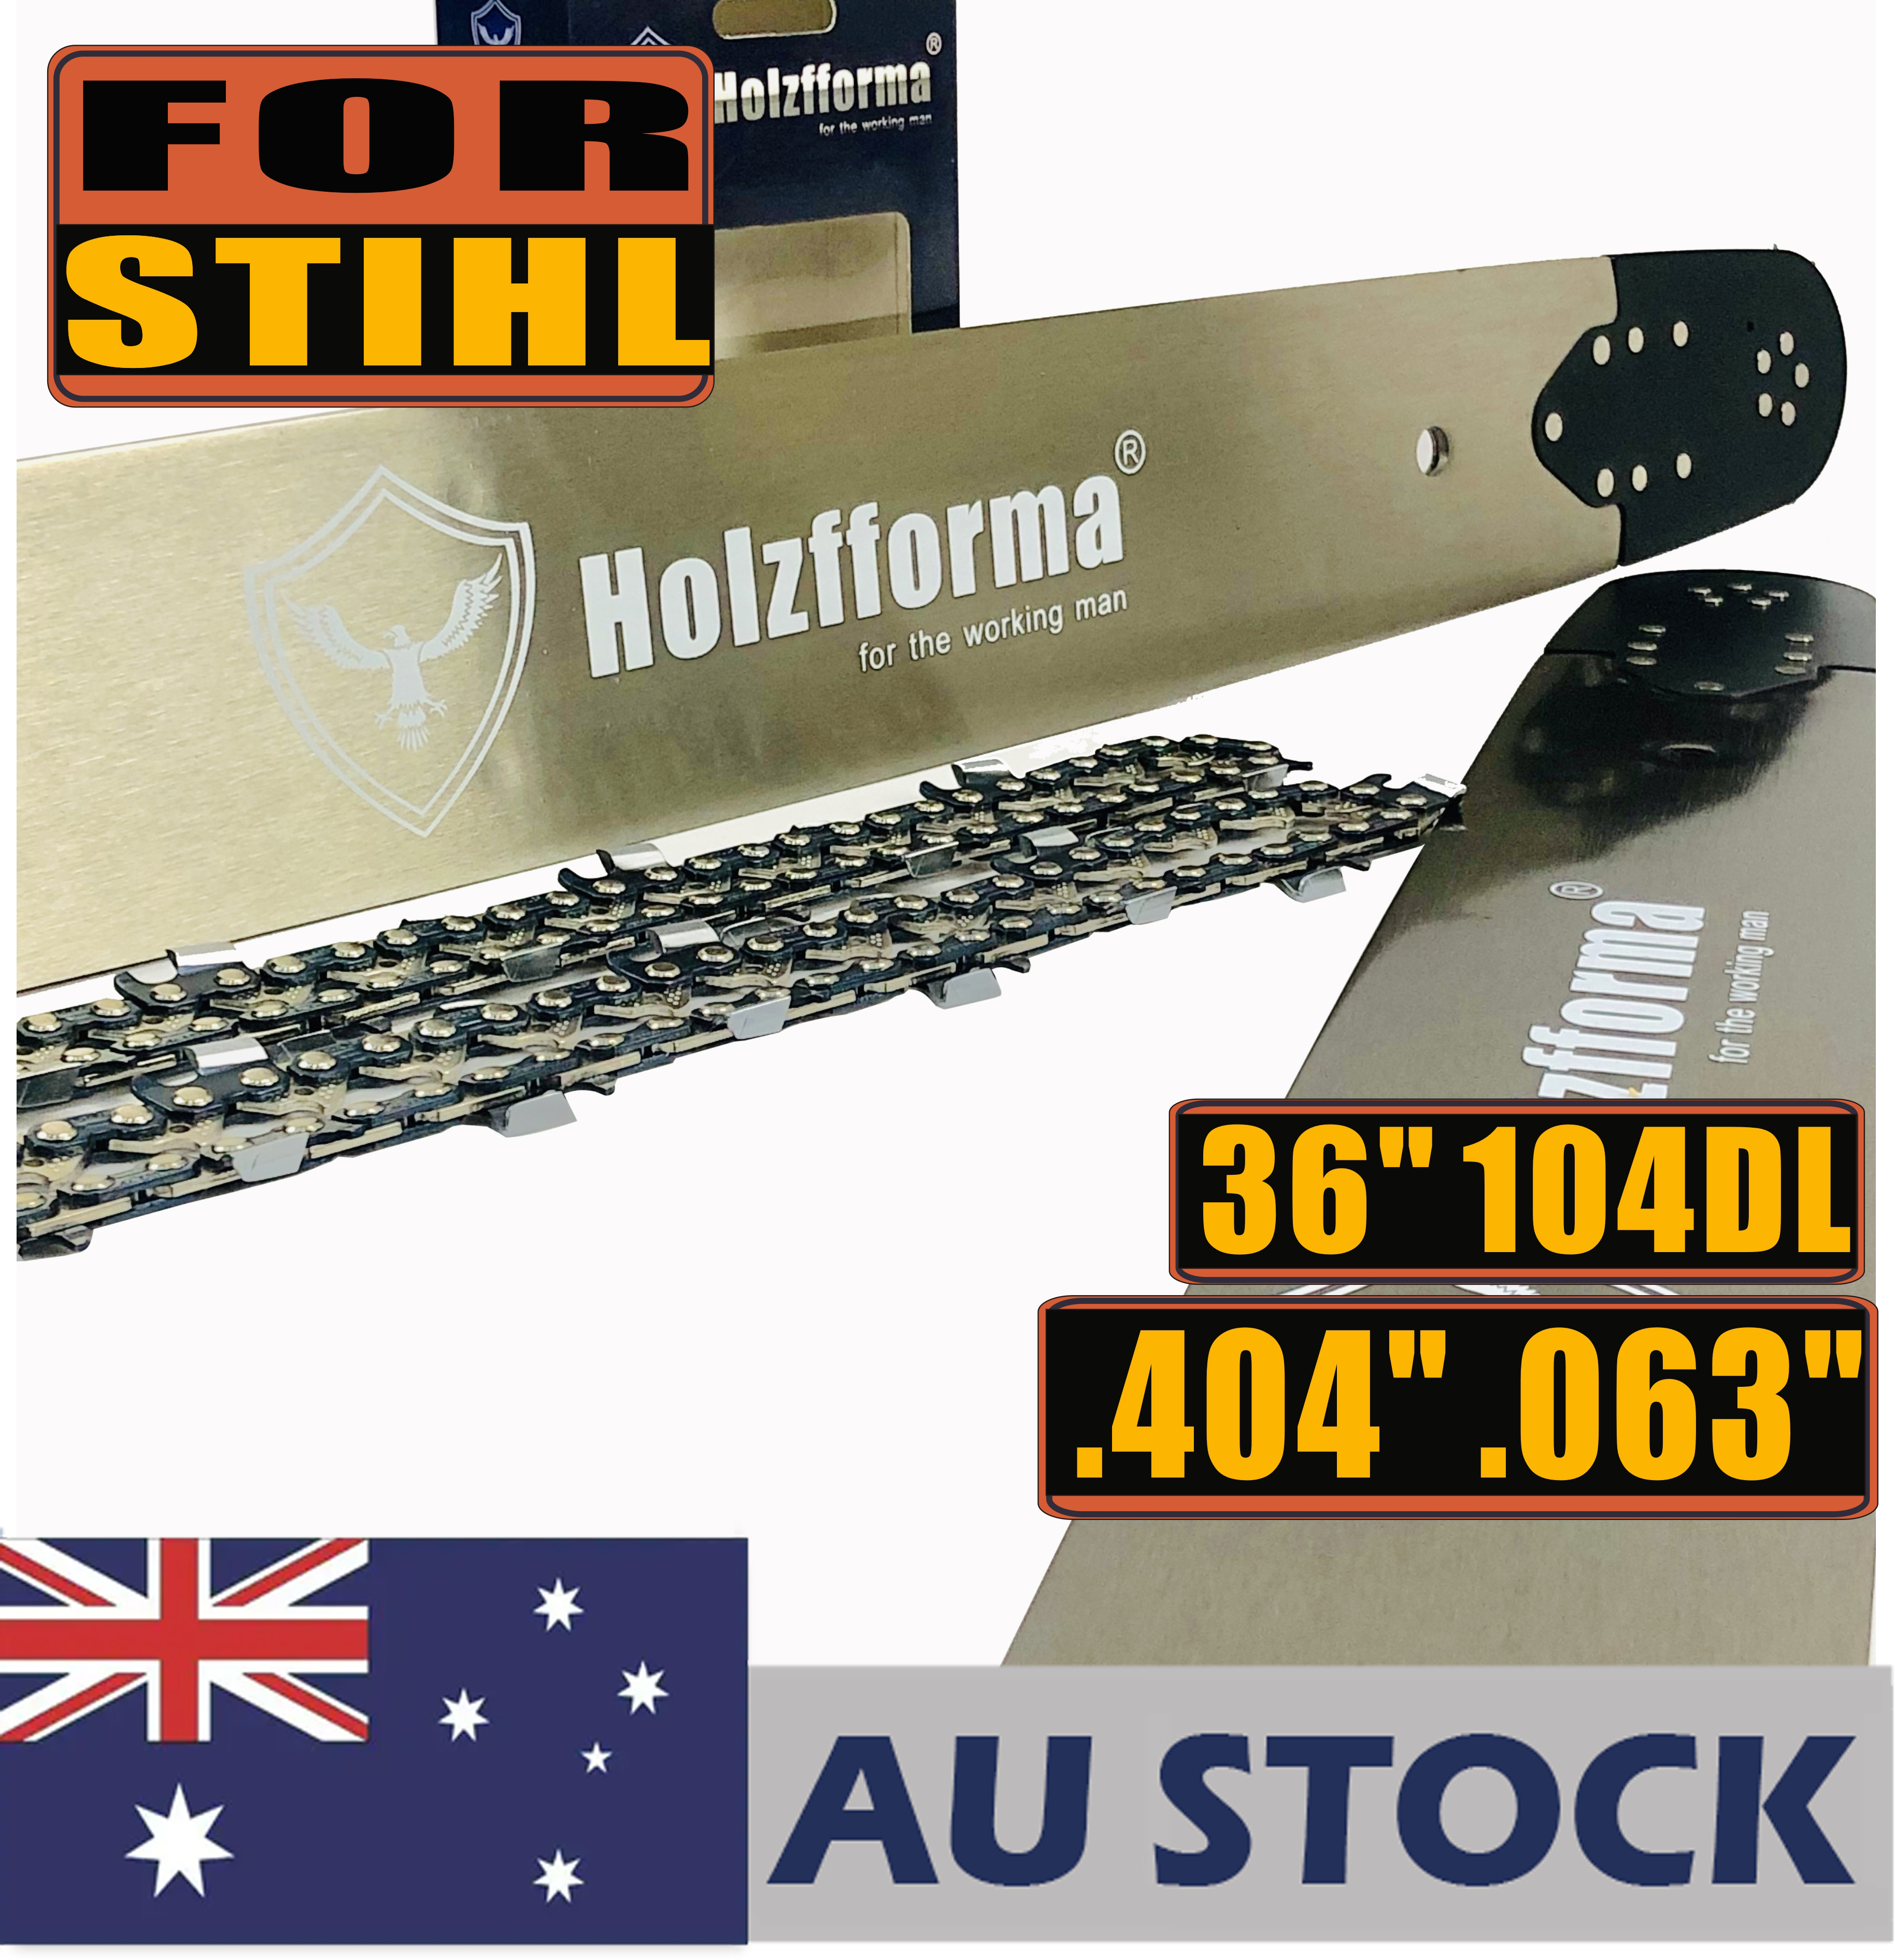 AU STOCK only to AU ADDRESS - Holzfforma® 36 Inch .404 .063 104 Drive Links Guide Bar & Full Chisel Saw Chain Combo For Stihl 088 MS880 070 090 084 076 075 051 050 and Holzfforma G888 Chainsaw 2-4 Days Delivery Time Fast Shipping For AU Customers Only